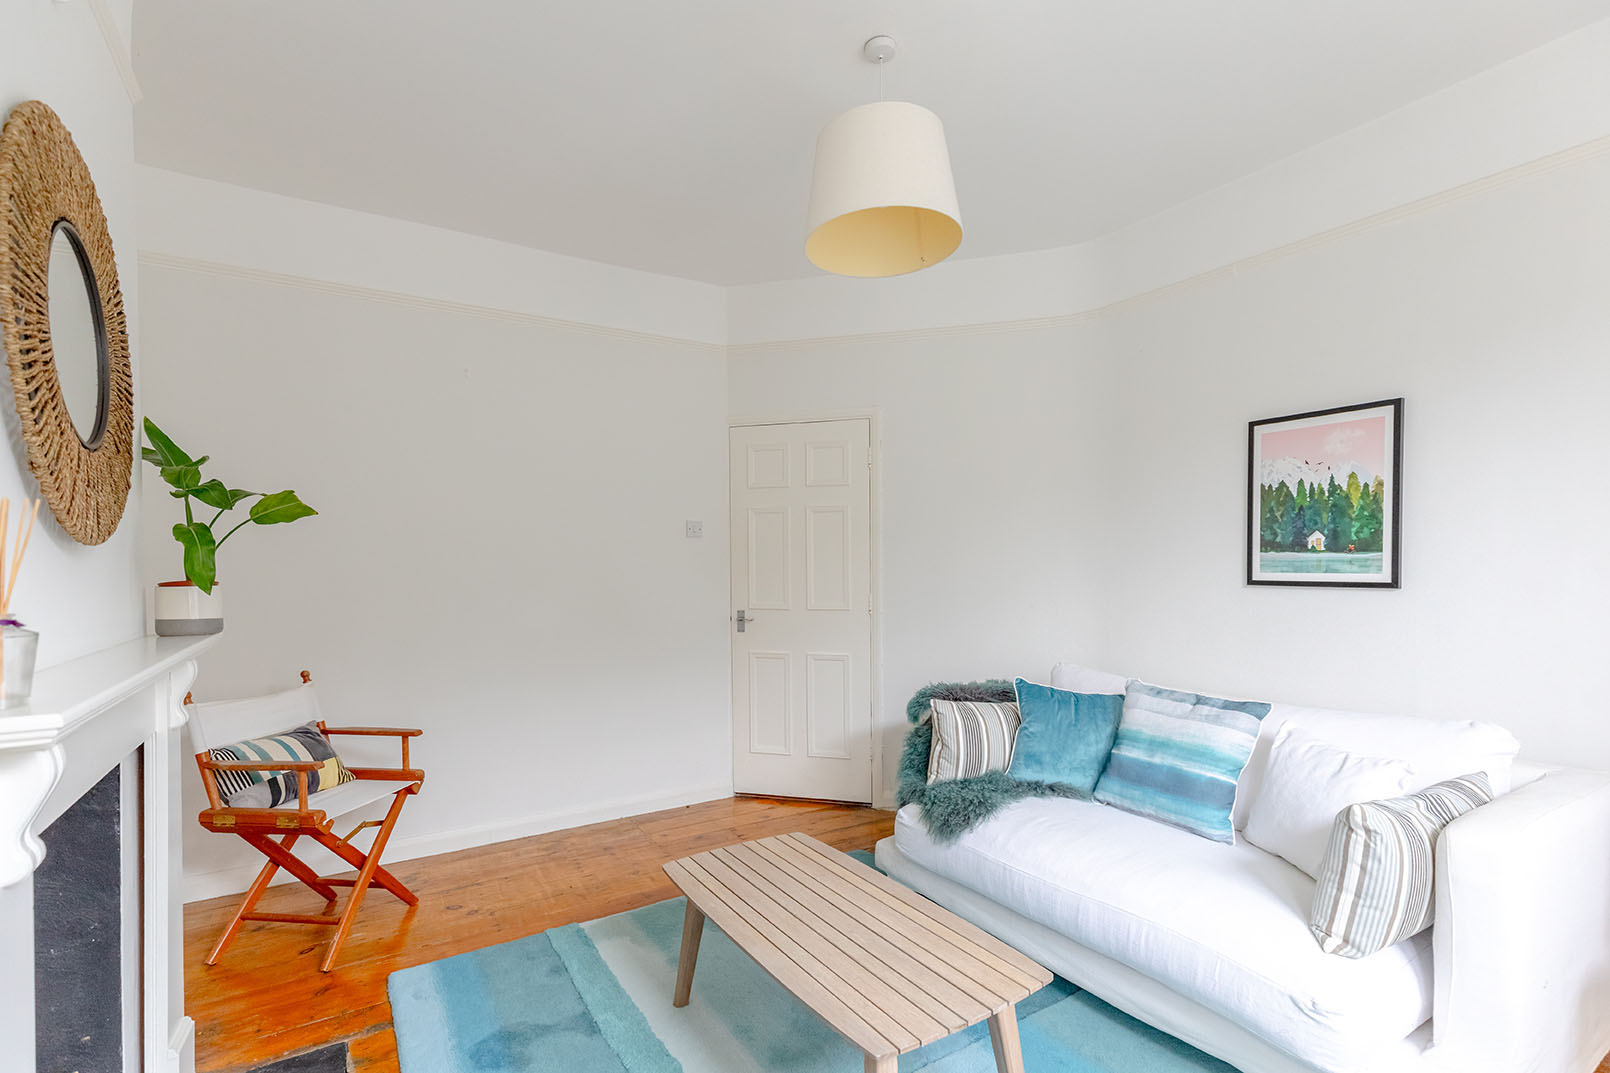 Direct angle for property photography of a Image of a smaller living room with wooden floor, a light blue coloured carpet on the floor, white walls and a white sofa with blue cushions.